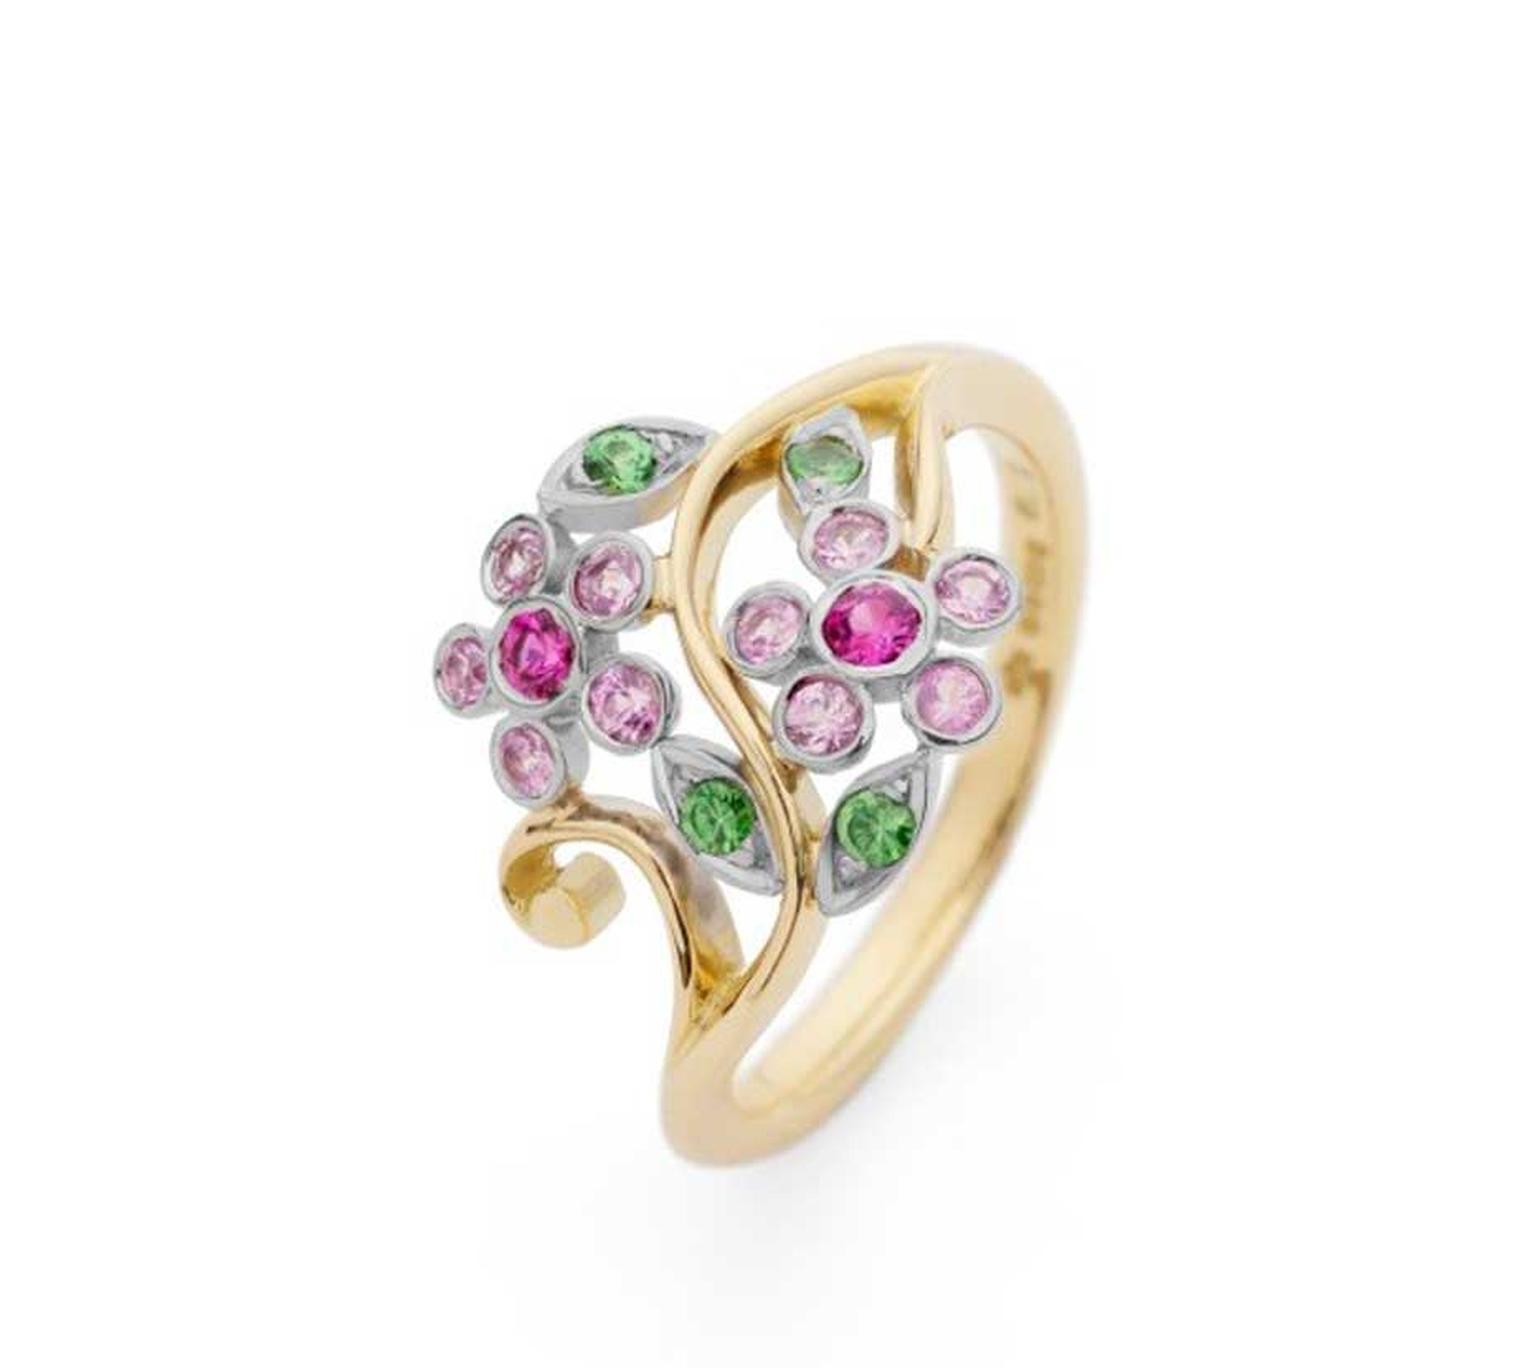 Creative cupid: coloured stone engagement rings for your Valentines proposal